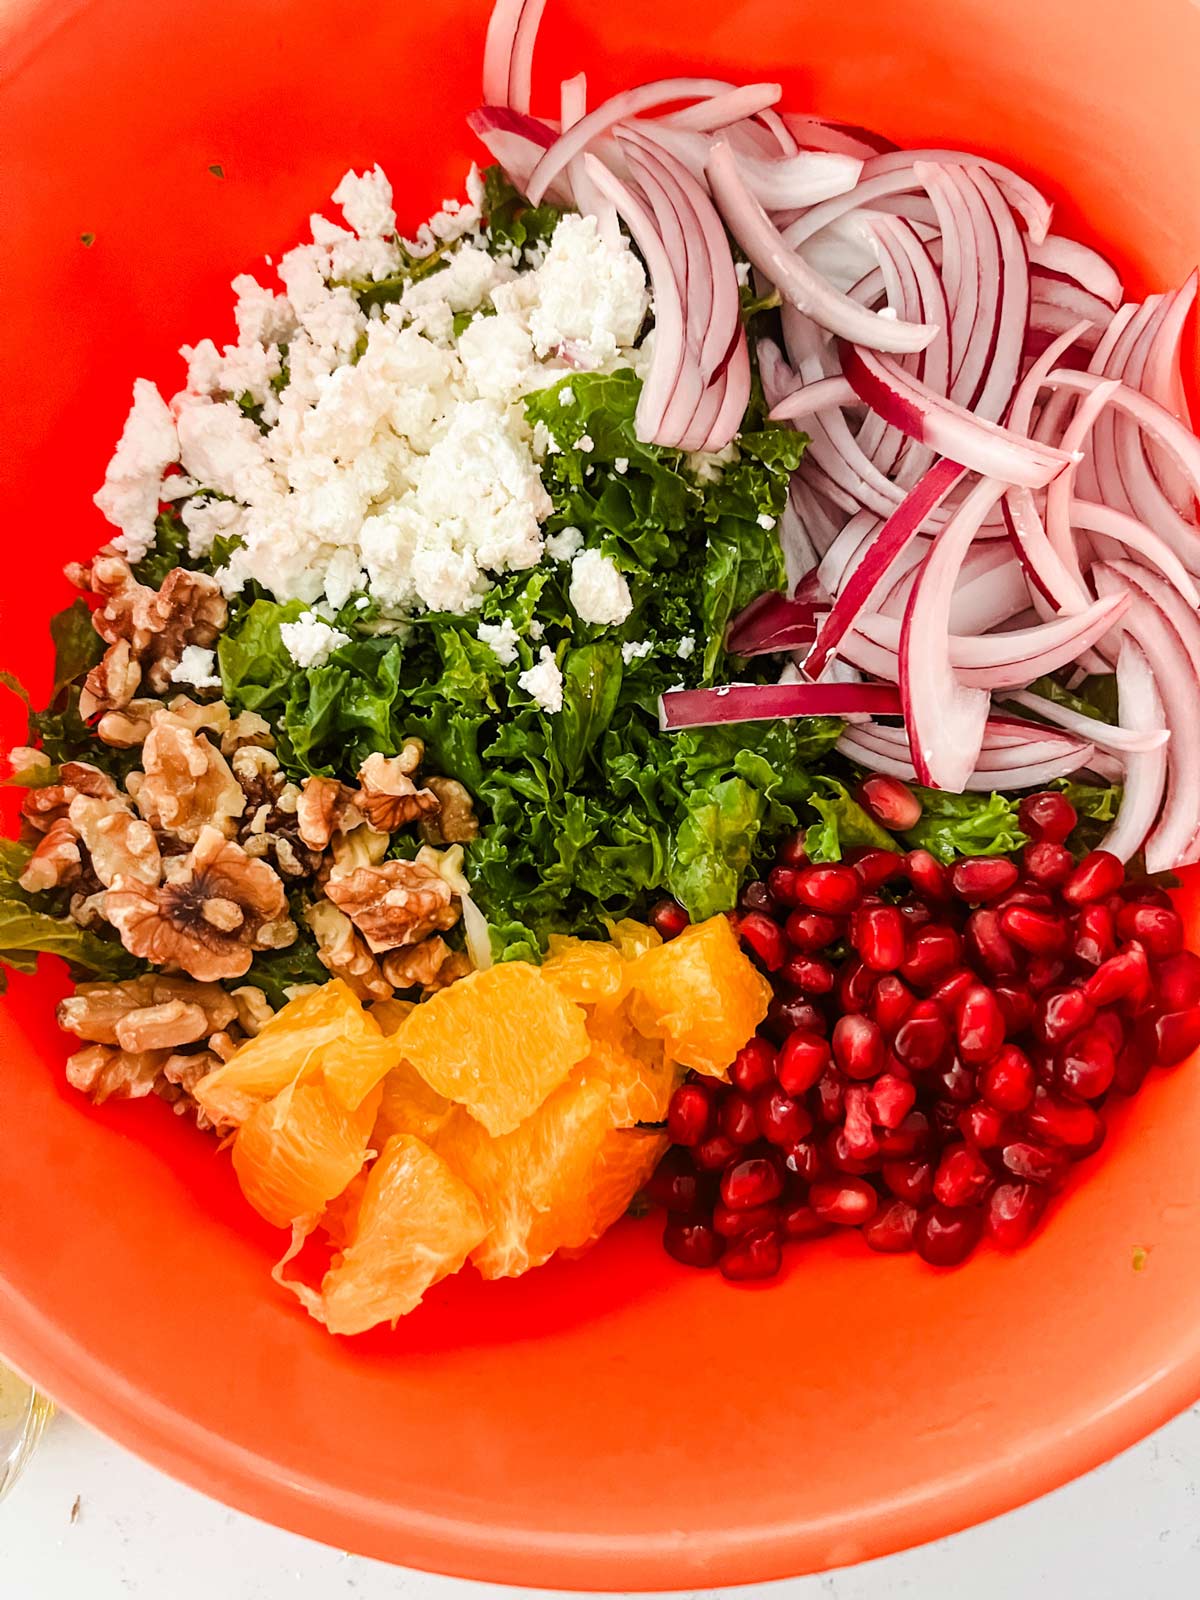 Kale in a bowl with pomegranate, orange, walnuts, goat cheese, and onion.